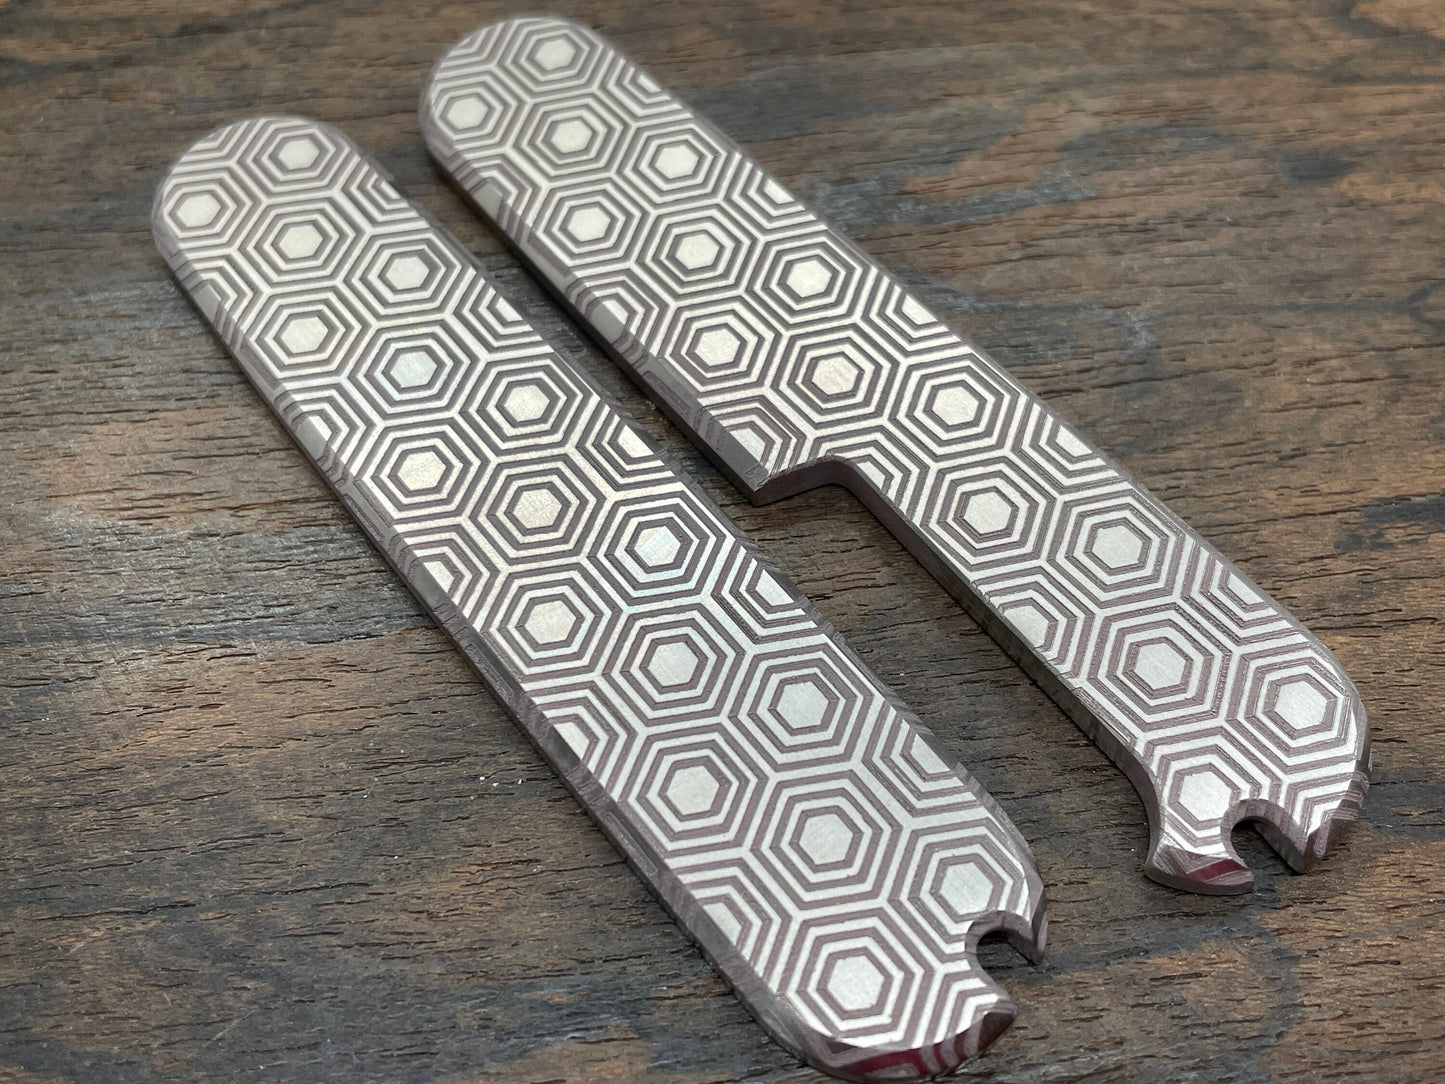 HONEYCOMB engraved 91mm Titanium Scales for Swiss Army SAK